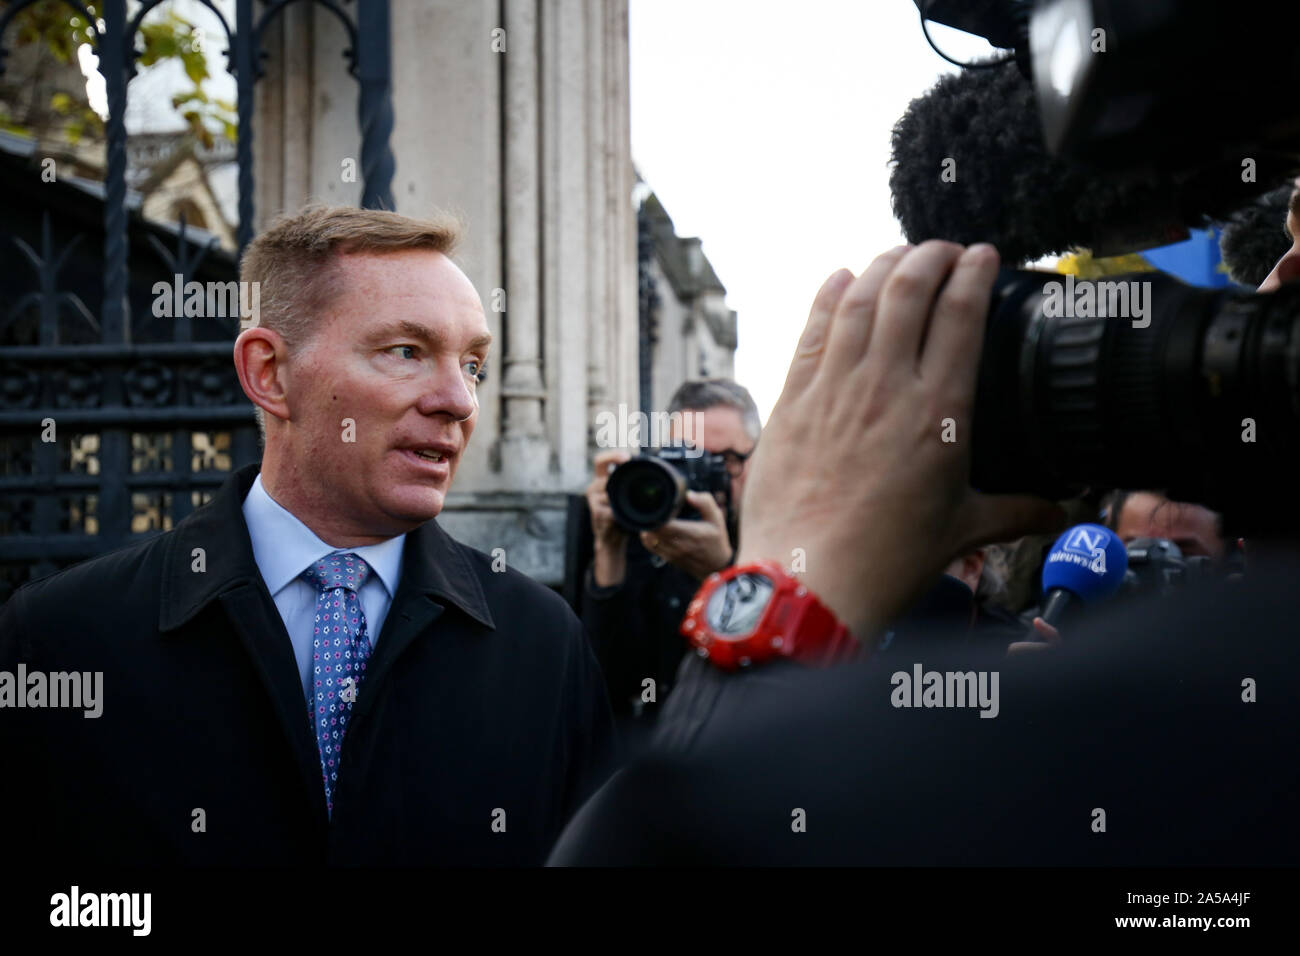 Labour MP Chris Bryant arrives at the Houses of Parliament in London ahead of Prime Minister Boris Johnson delivering a statement in the House of Commons on his new Brexit deal after the EU Council summit, on what has been dubbed 'Super Saturday'. Stock Photo